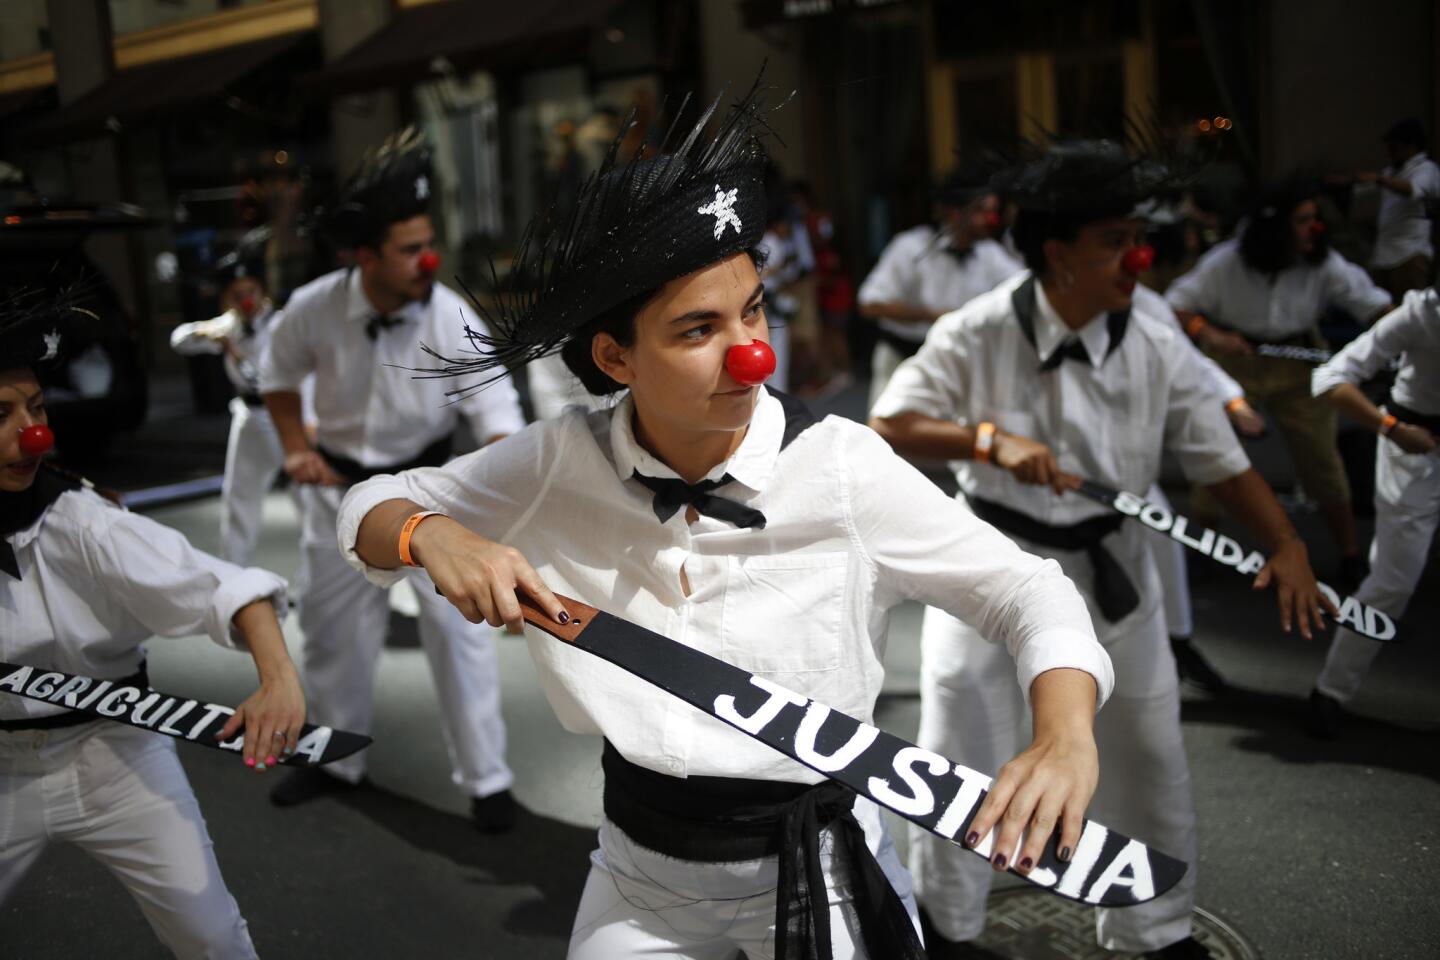 Puerto Rican Day Parade in New York